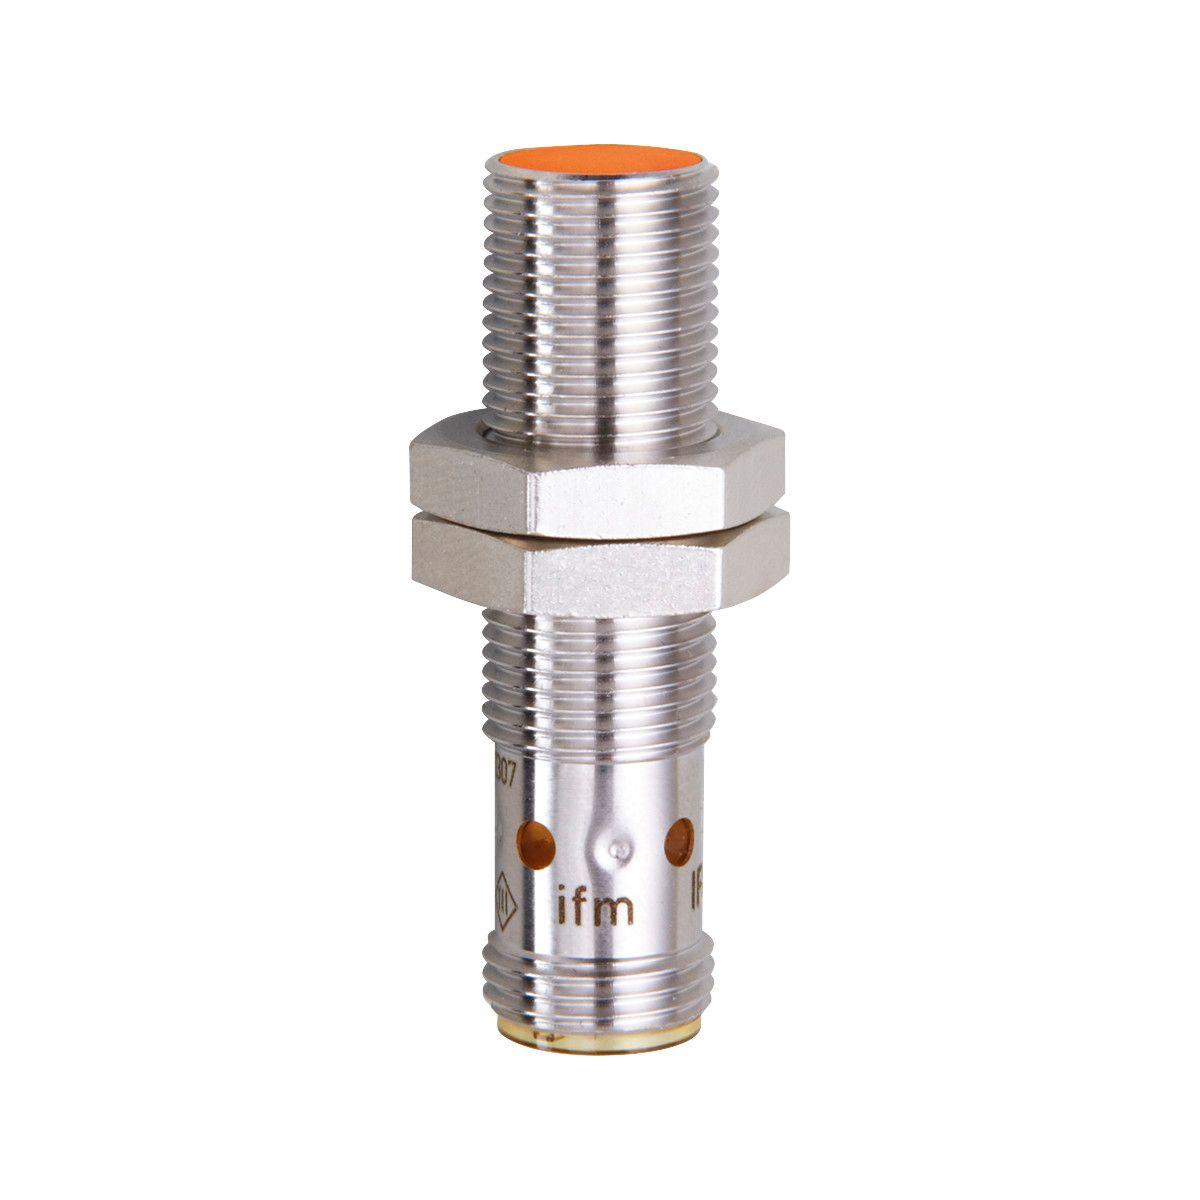 ifm Electronic IFS204 Inductive sensor, Particularly short housing for use where space is restricted, Electrical design: PNP, Output function: normally open, Sensing range [mm]: 4, Housing: Threaded type, Dimensions [mm]: M12 x 1 / L = 45, System: gold-plated contacts; Increas